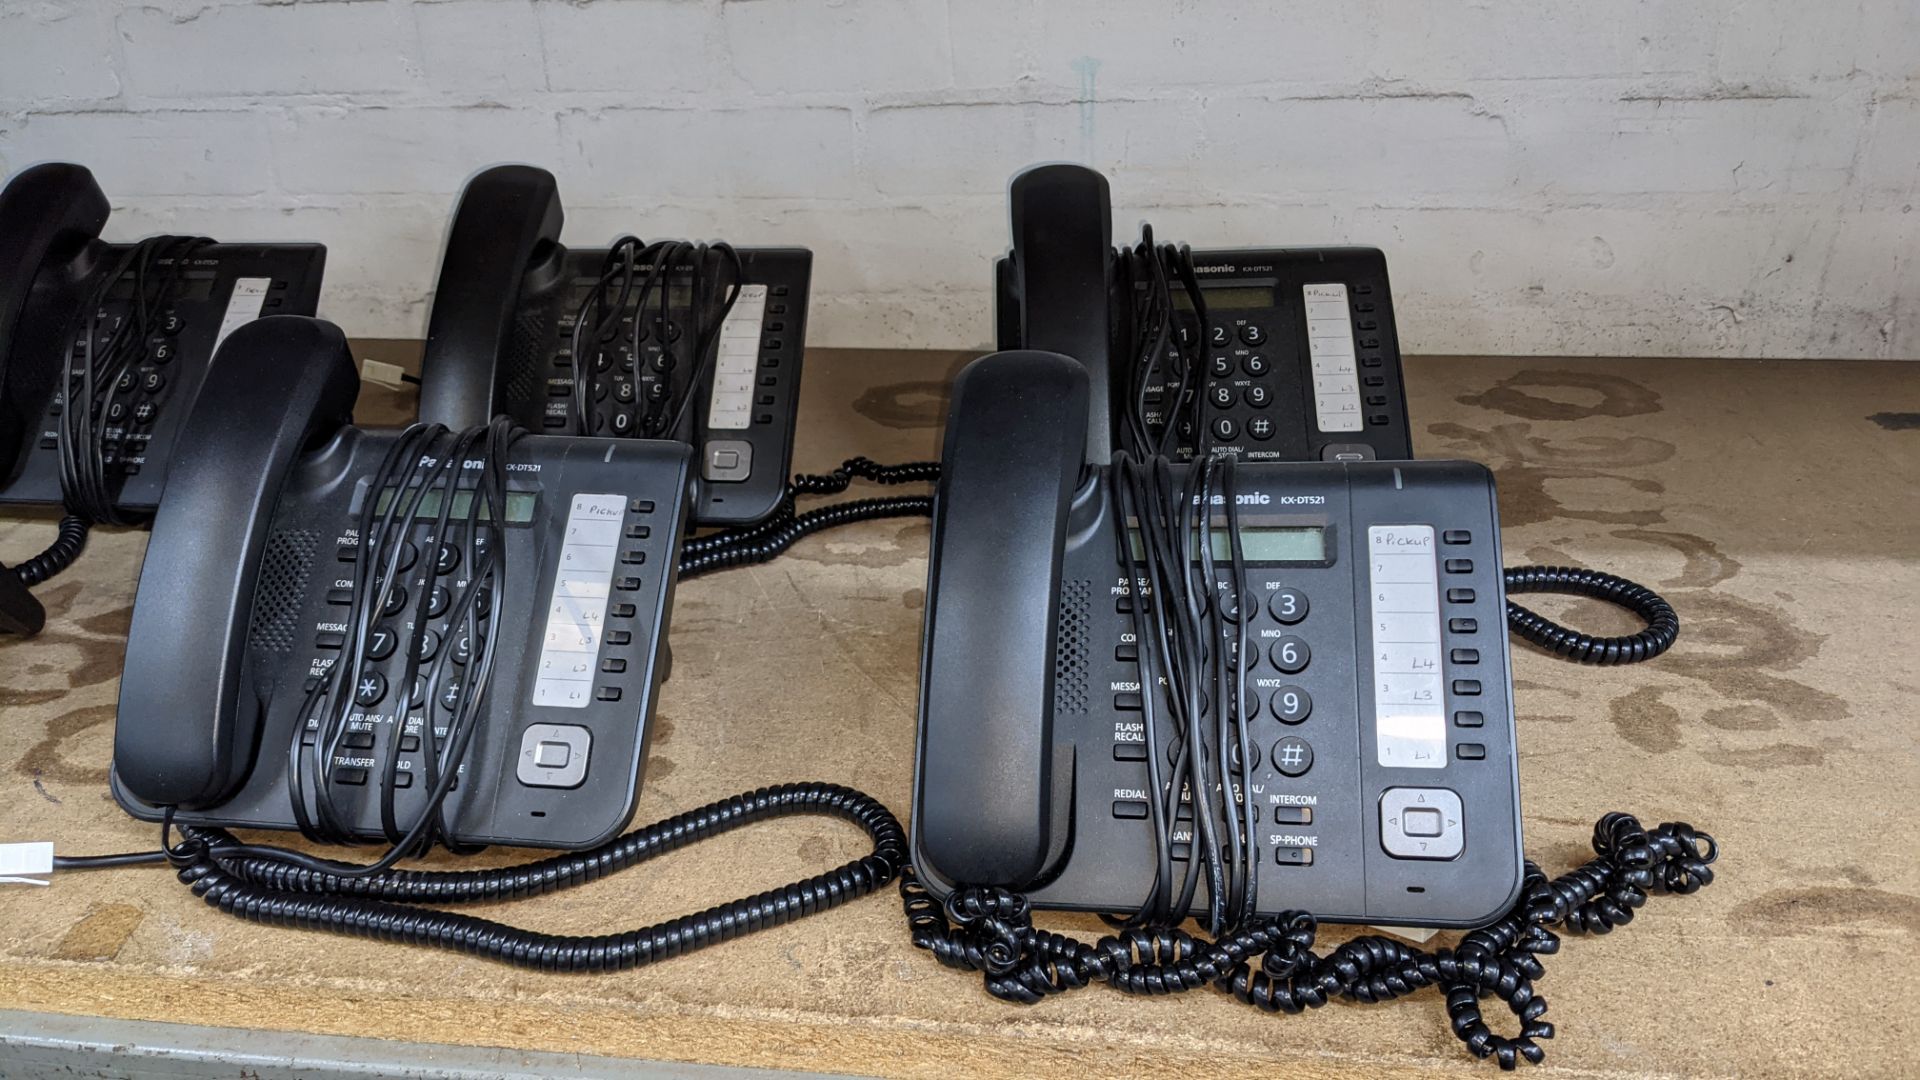 Panasonic phone system comprising KX-NS700 phone system plus 6 handsets - Image 10 of 12